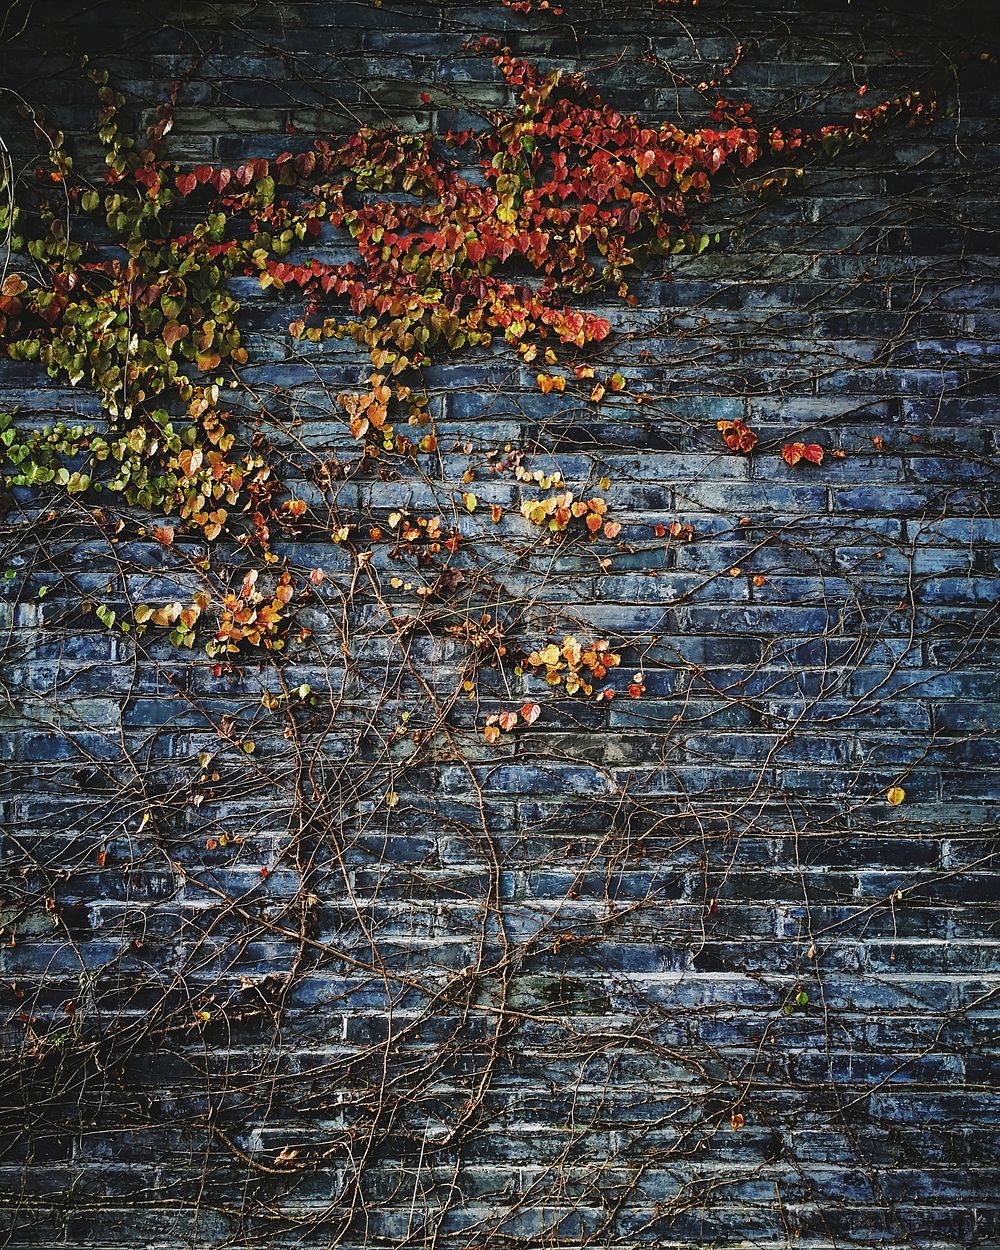 Autumn leaves on brick wall. Original public domain image from Wikimedia Commons